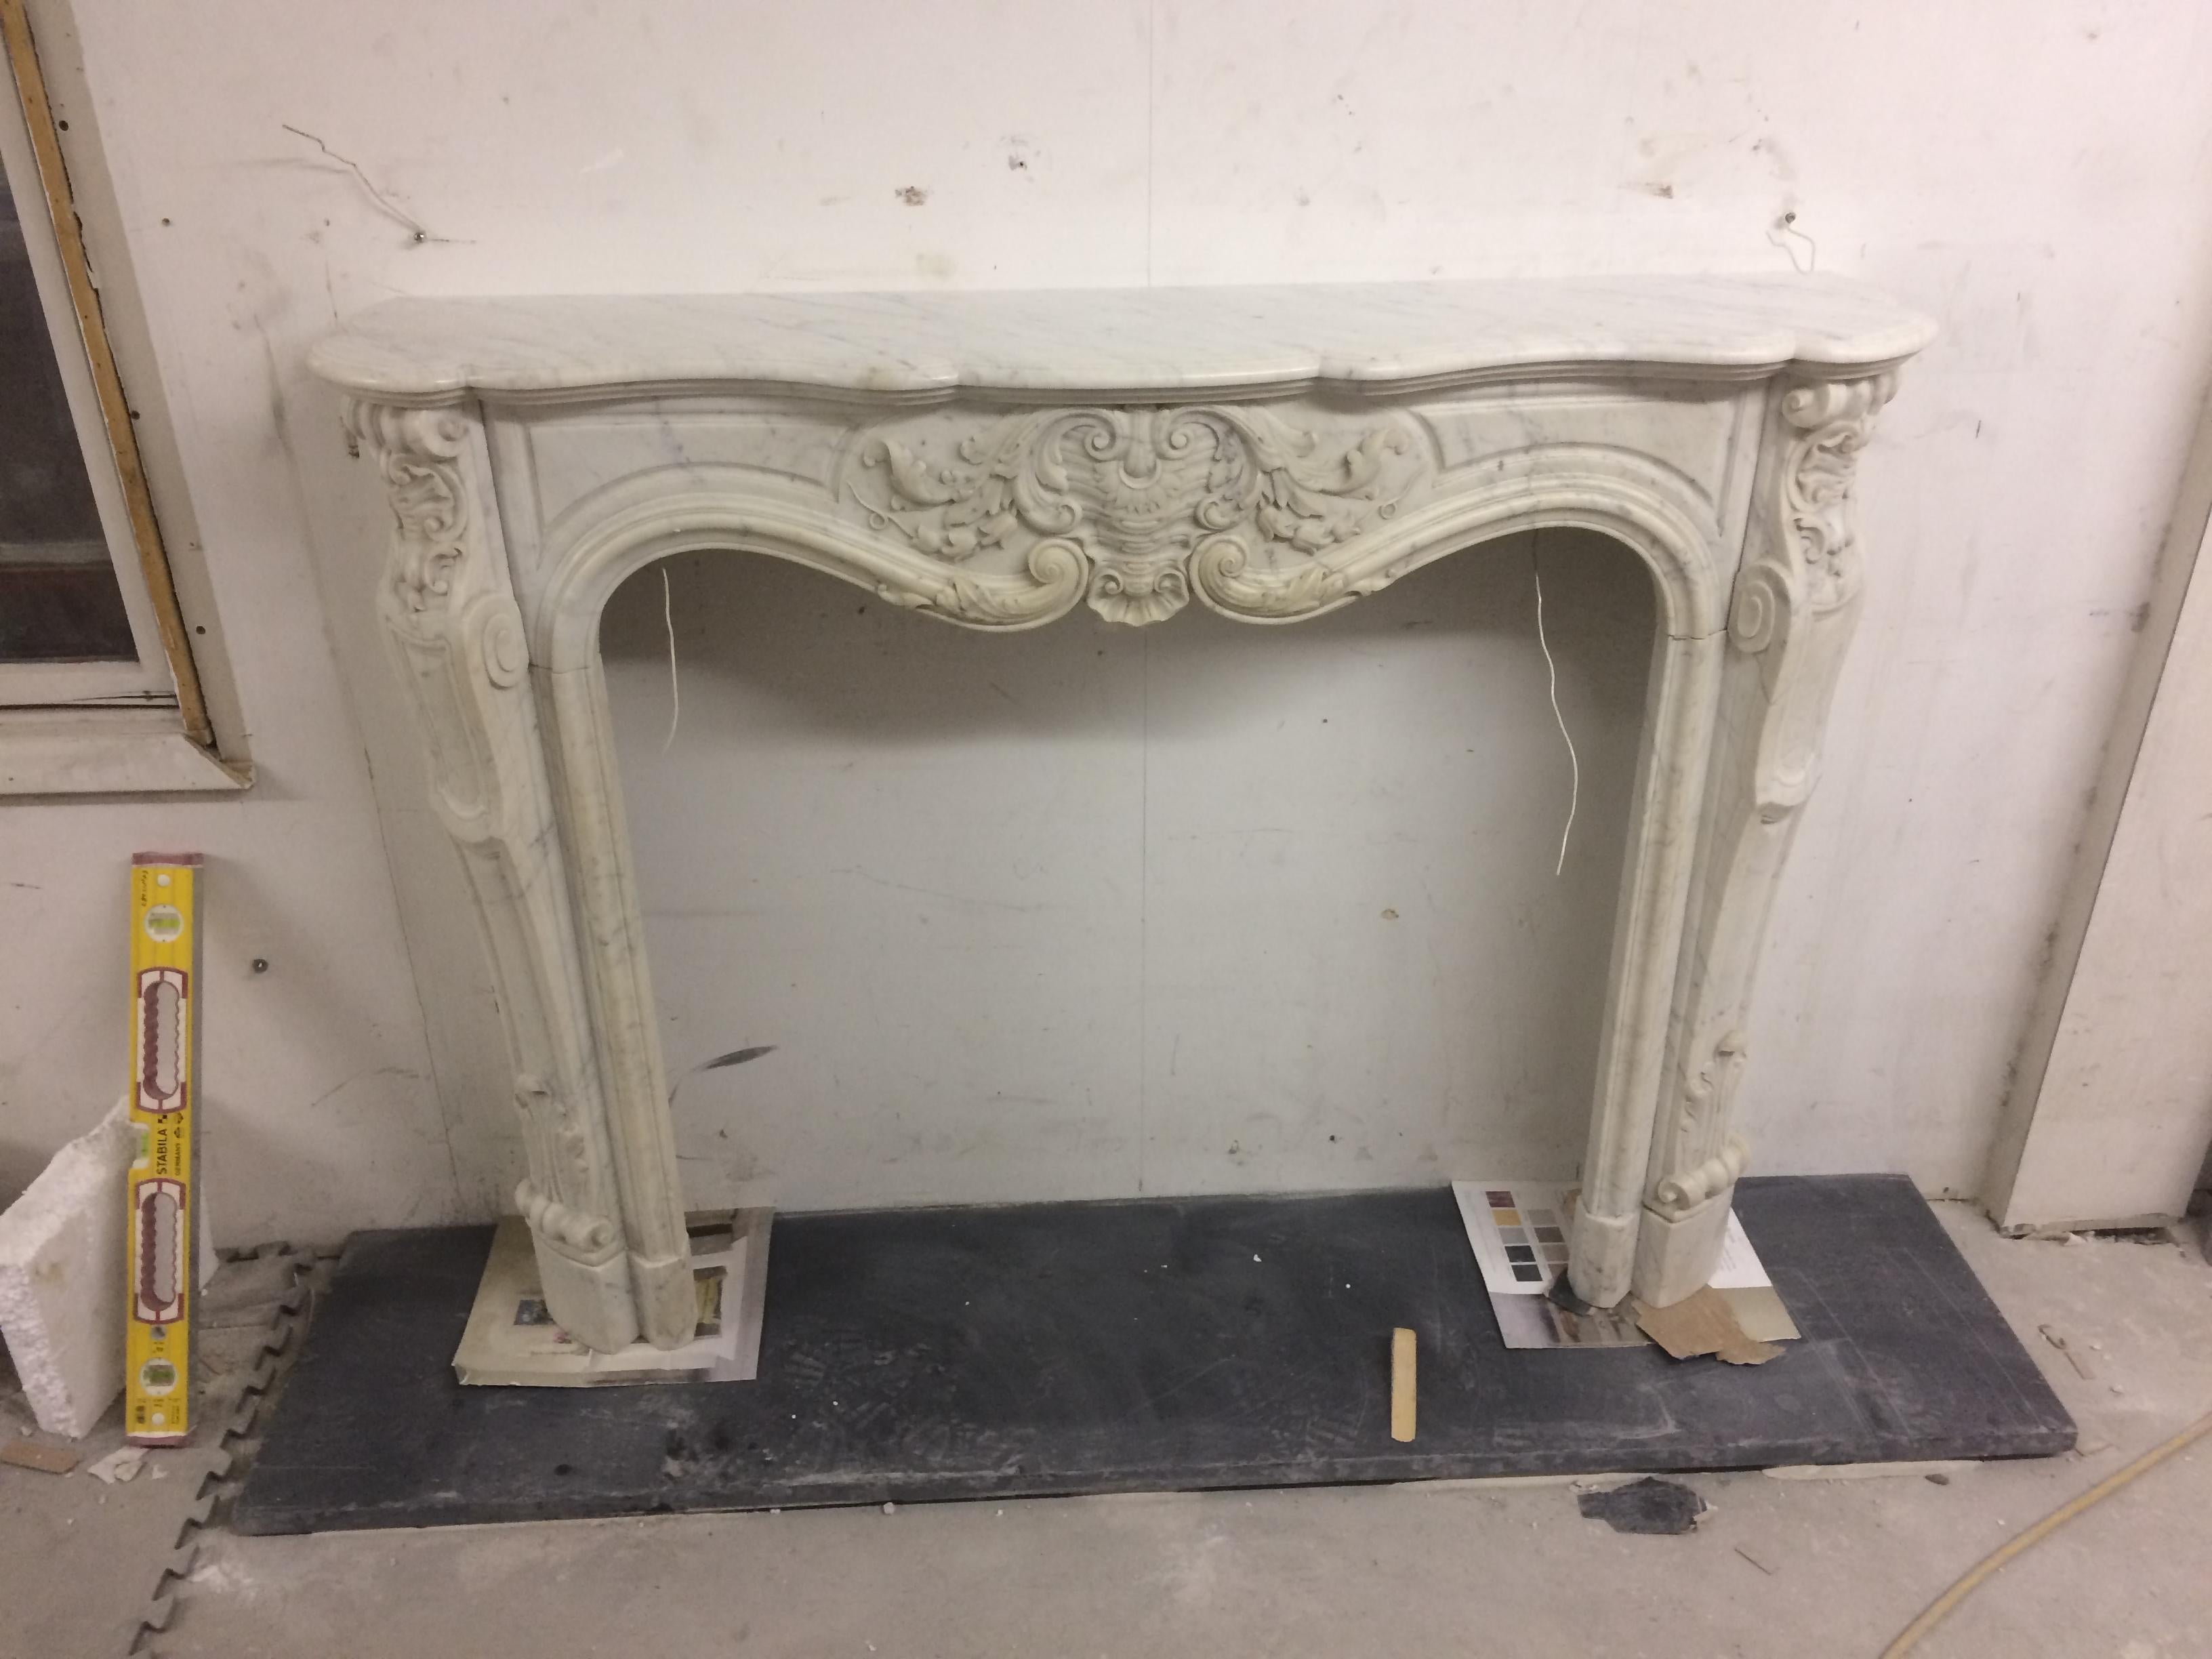 Petite Louis XV style mantelpiece with Scallop shell Cartouche carved in Carrara marbel.

Opening dimensions: 38